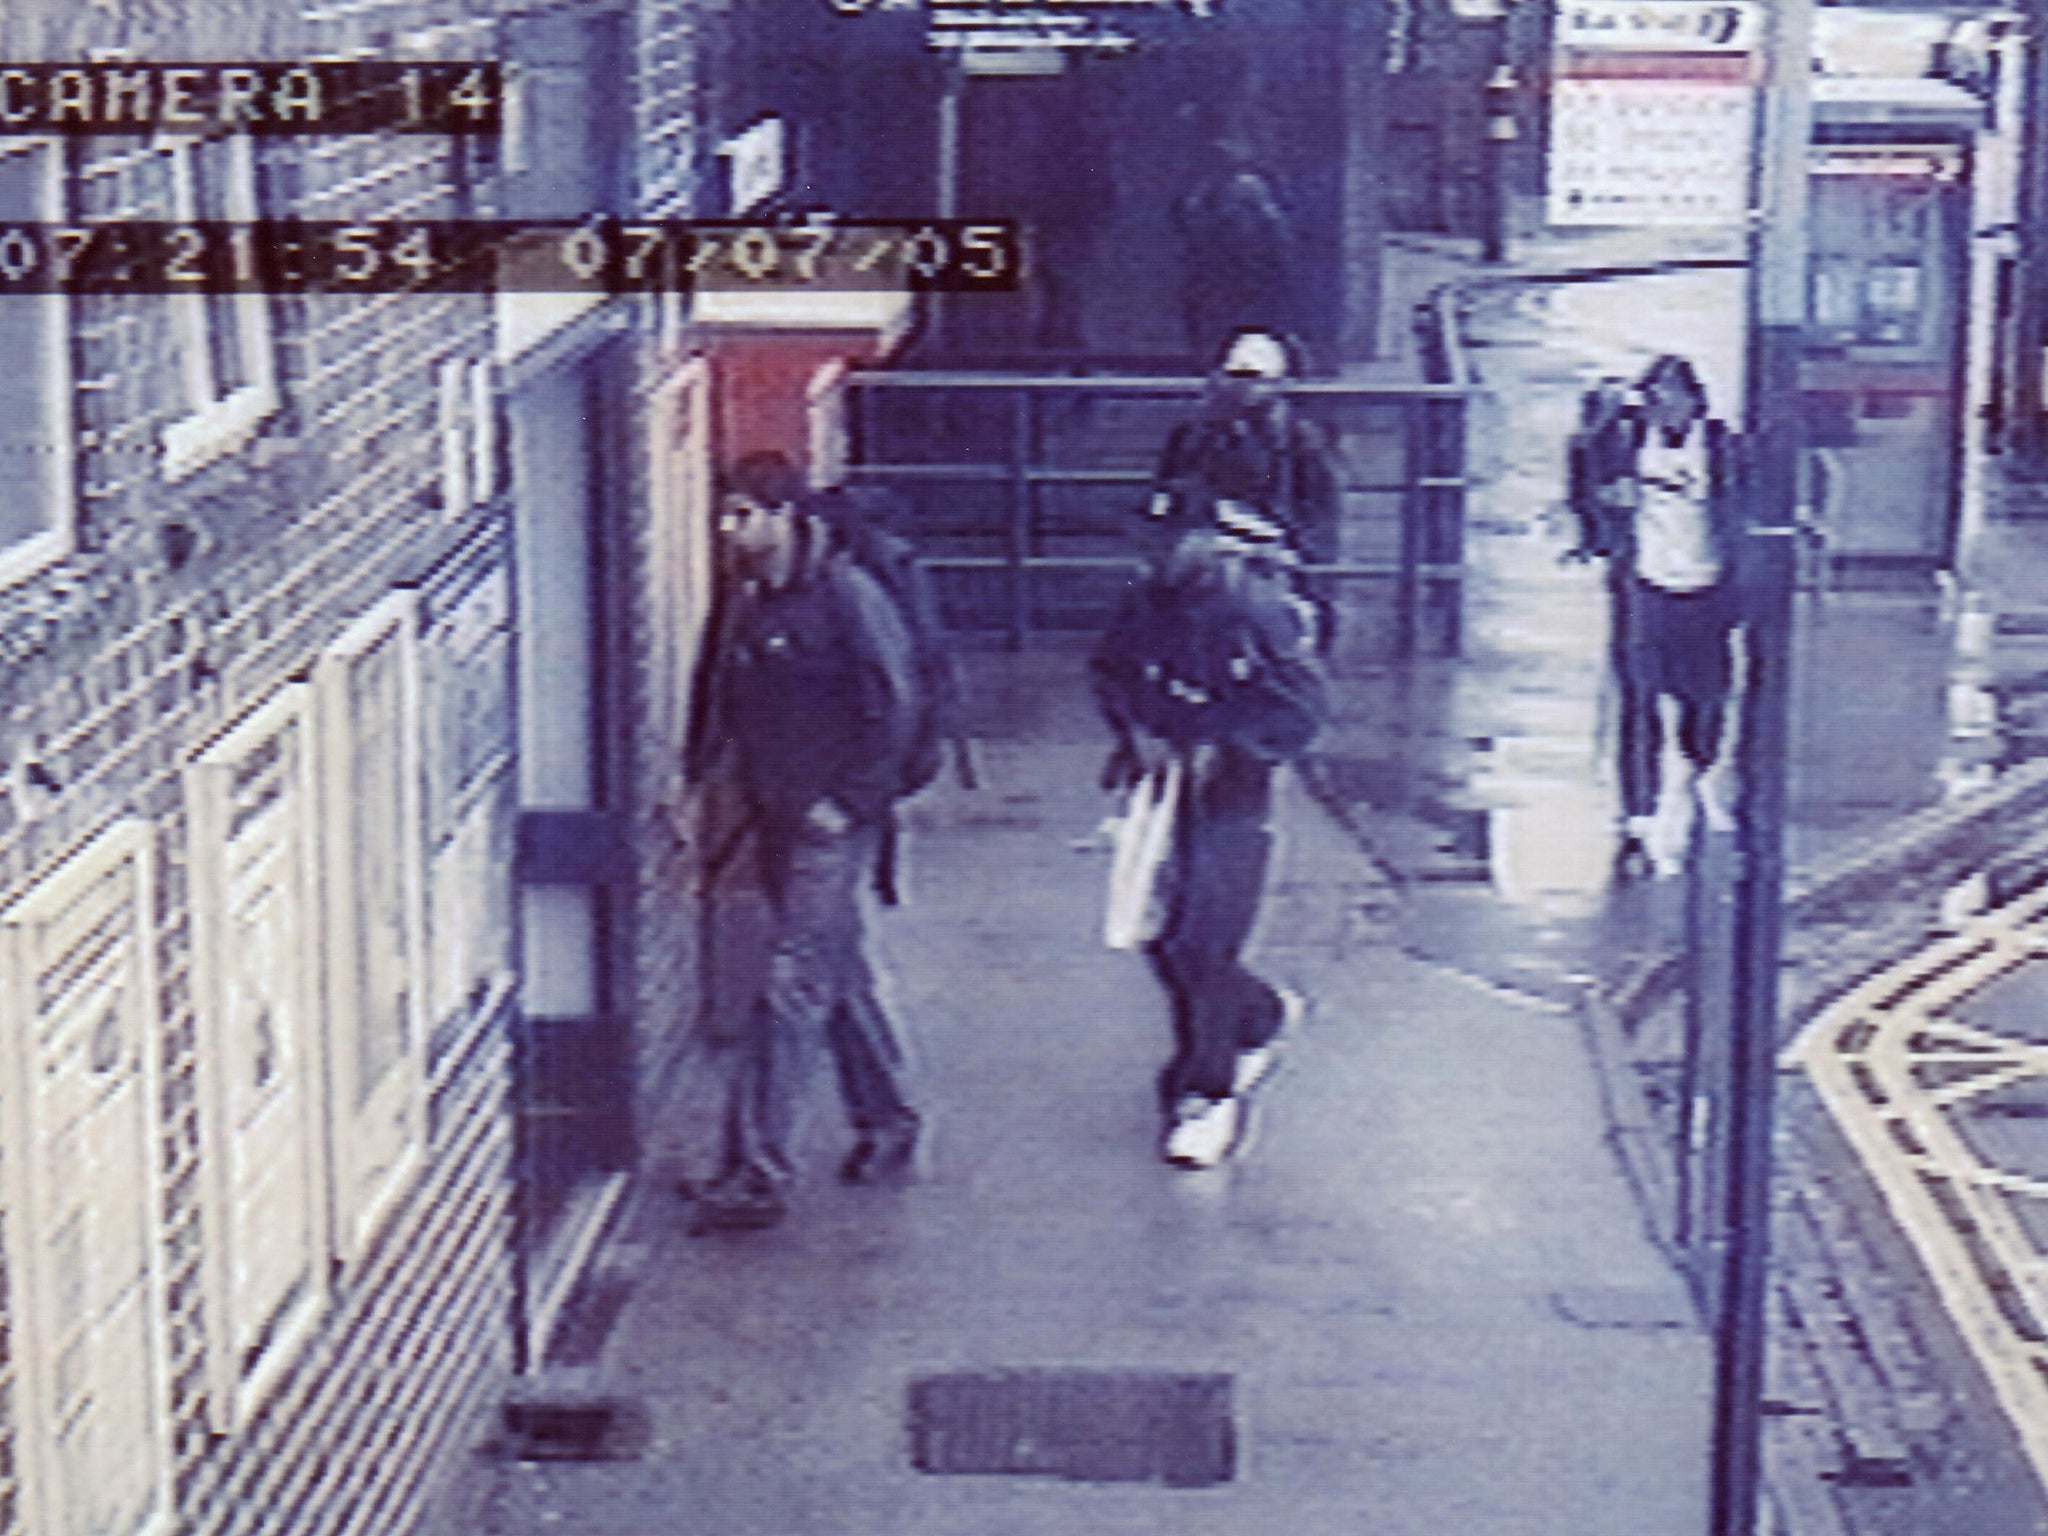 An image taken from CCTV footage of three of the four 7/7 bombers. From left to right: Mohammed Sidique Khan, Germaine Lindsay and Shahzad Tanweer arriving at King's Cross